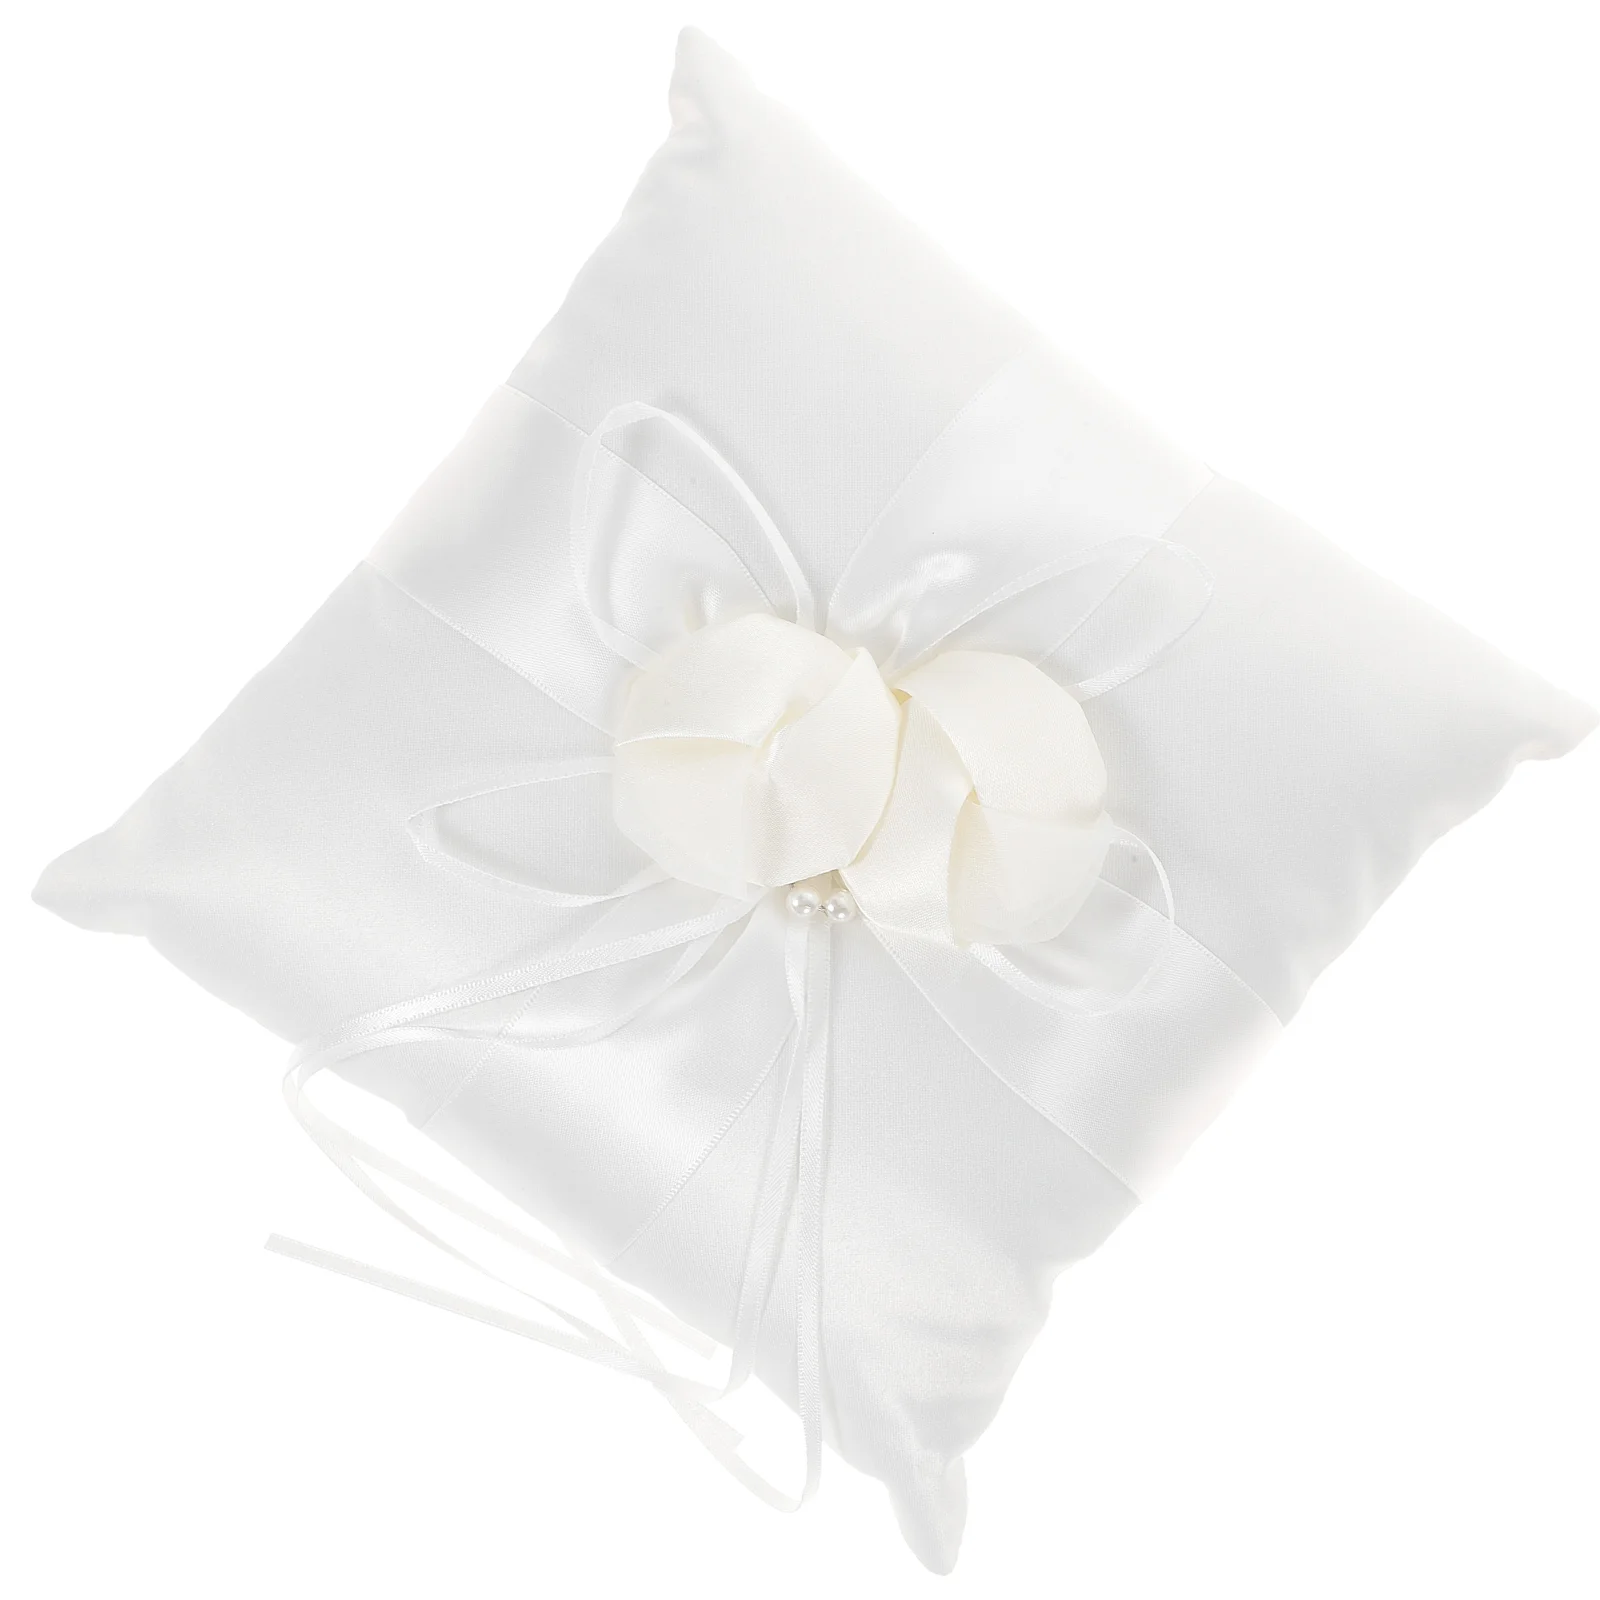 

20*20cm Lovely Flower Buds & Faux Pearls Decor Bridal Wedding Ceramony Pocket Ring Pillow Cushion Bearer with Ribbons (White)